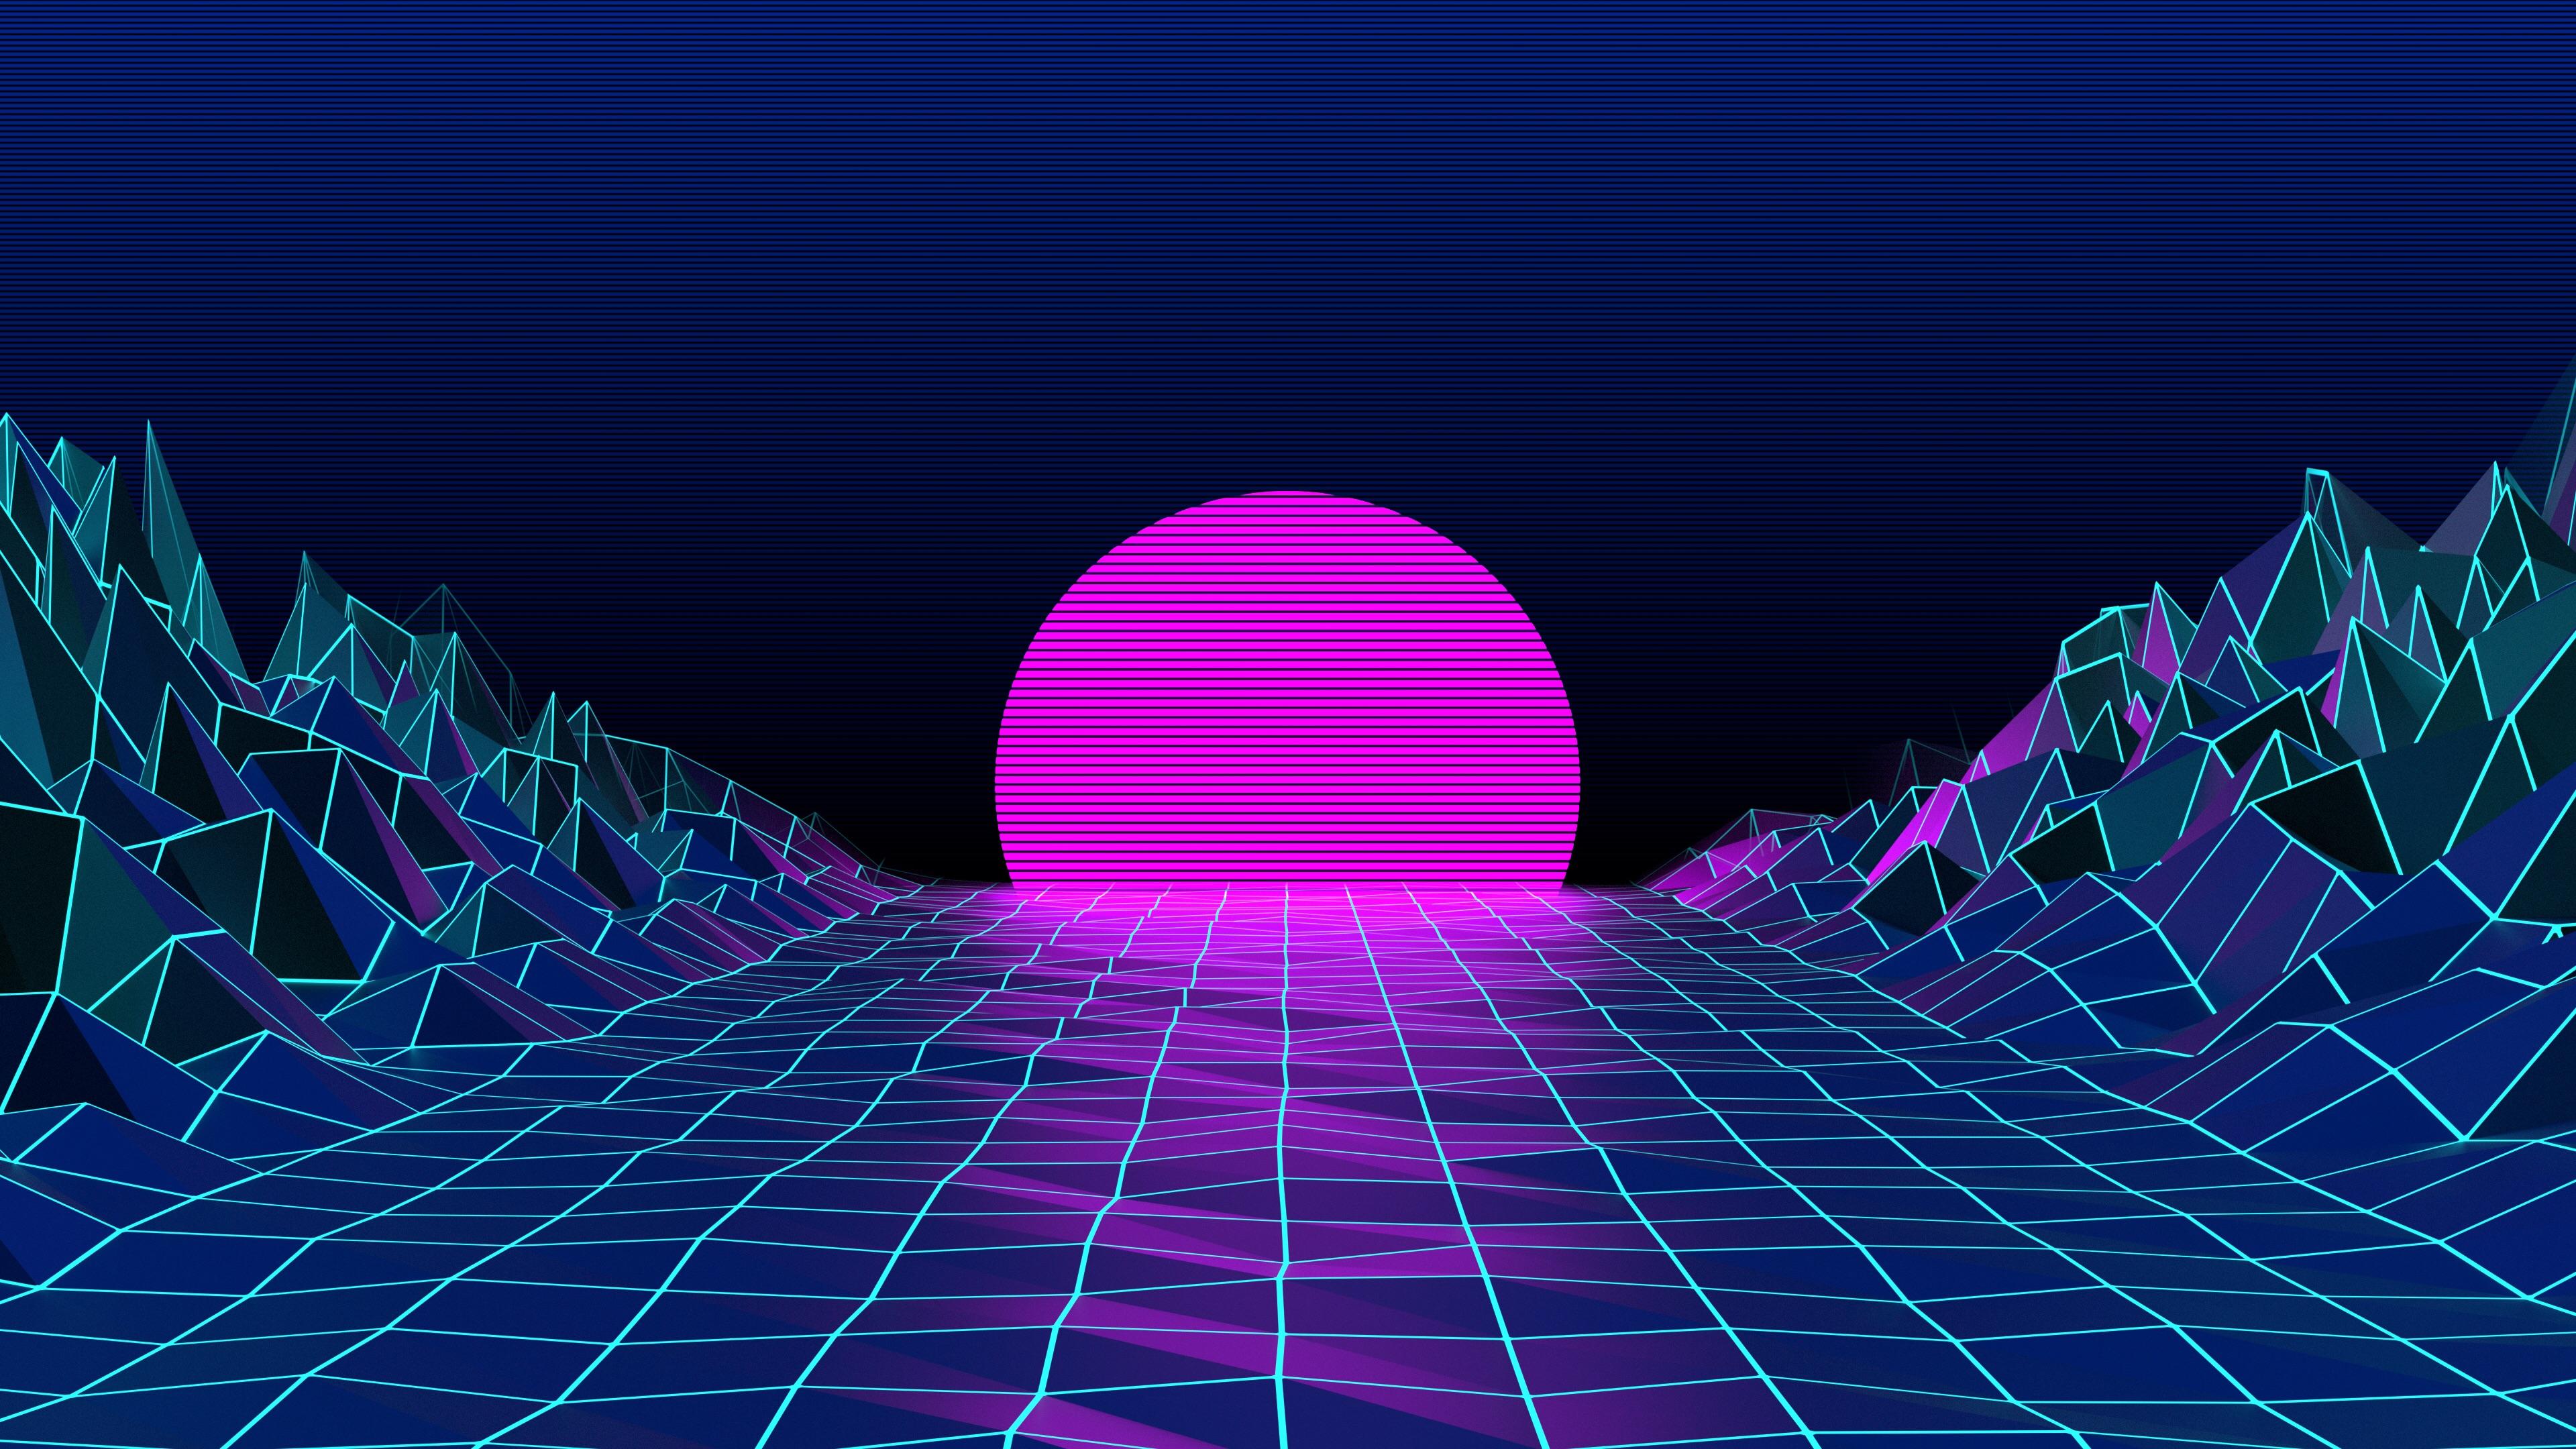 Retrowave Sunrise, HD Abstract, 4k Wallpaper, Image, Background